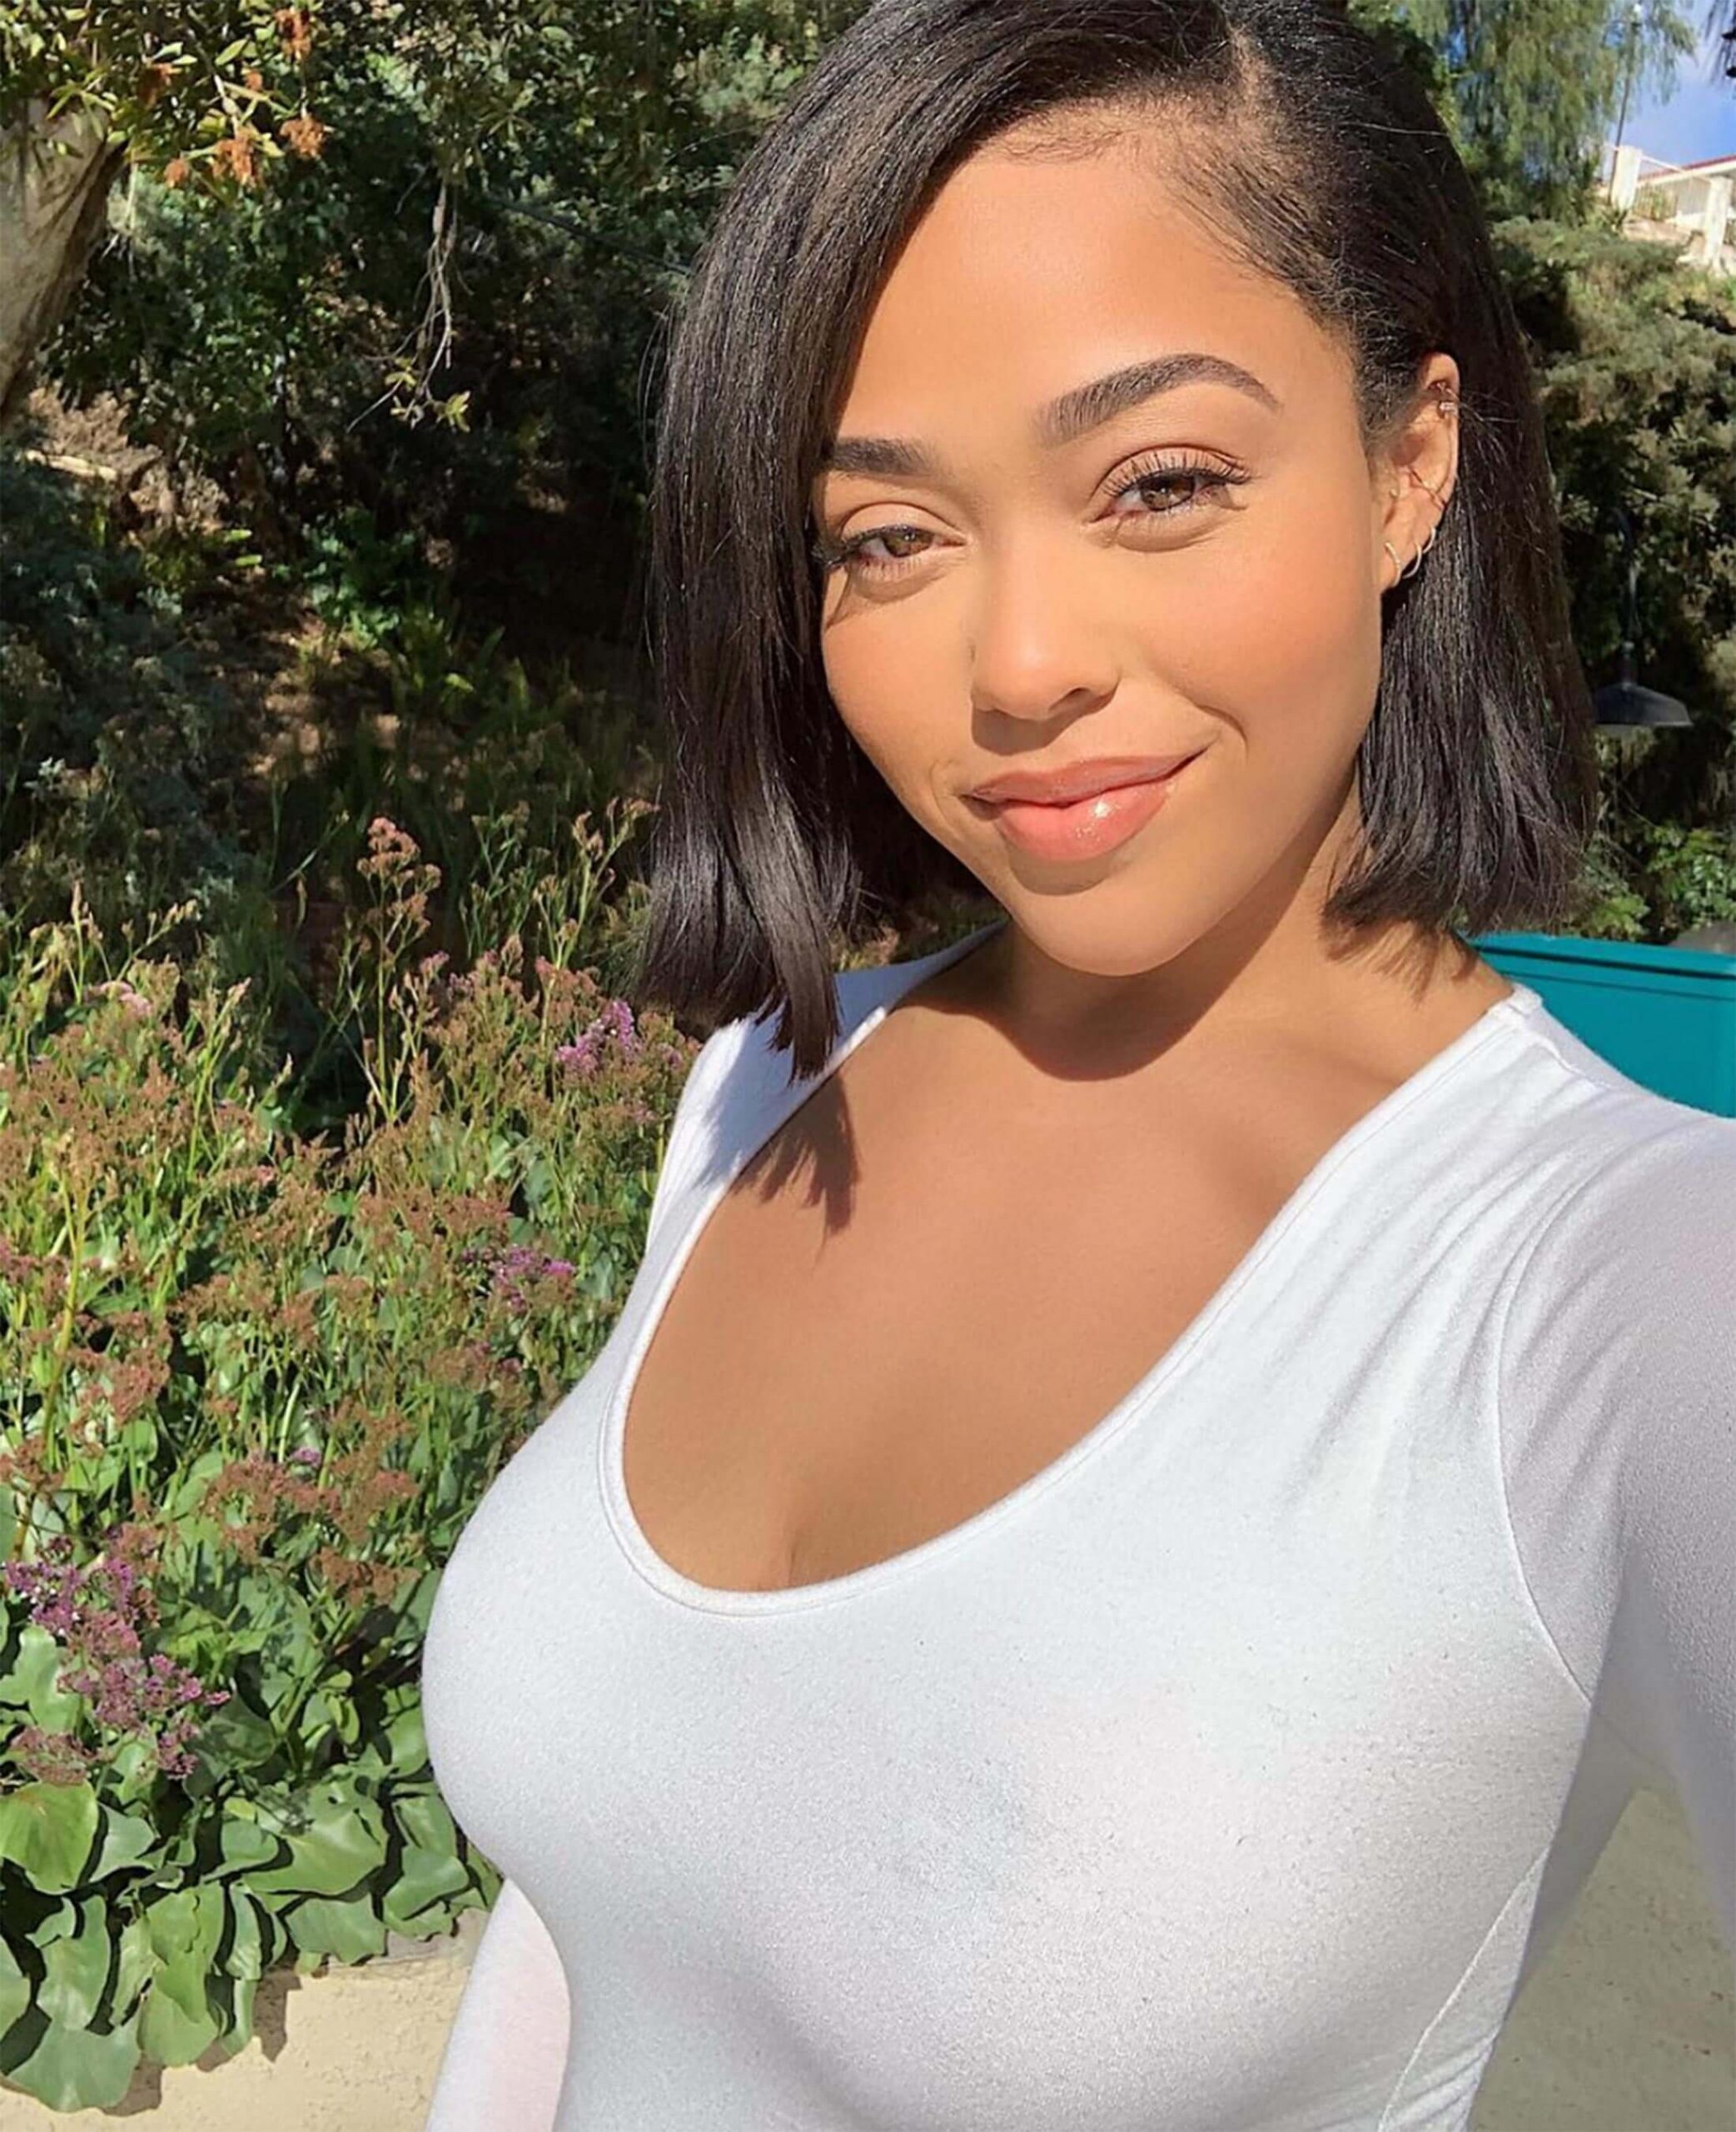 60+ Hot Pictures Of Jordyn Woods Which Will Make Your Day 2